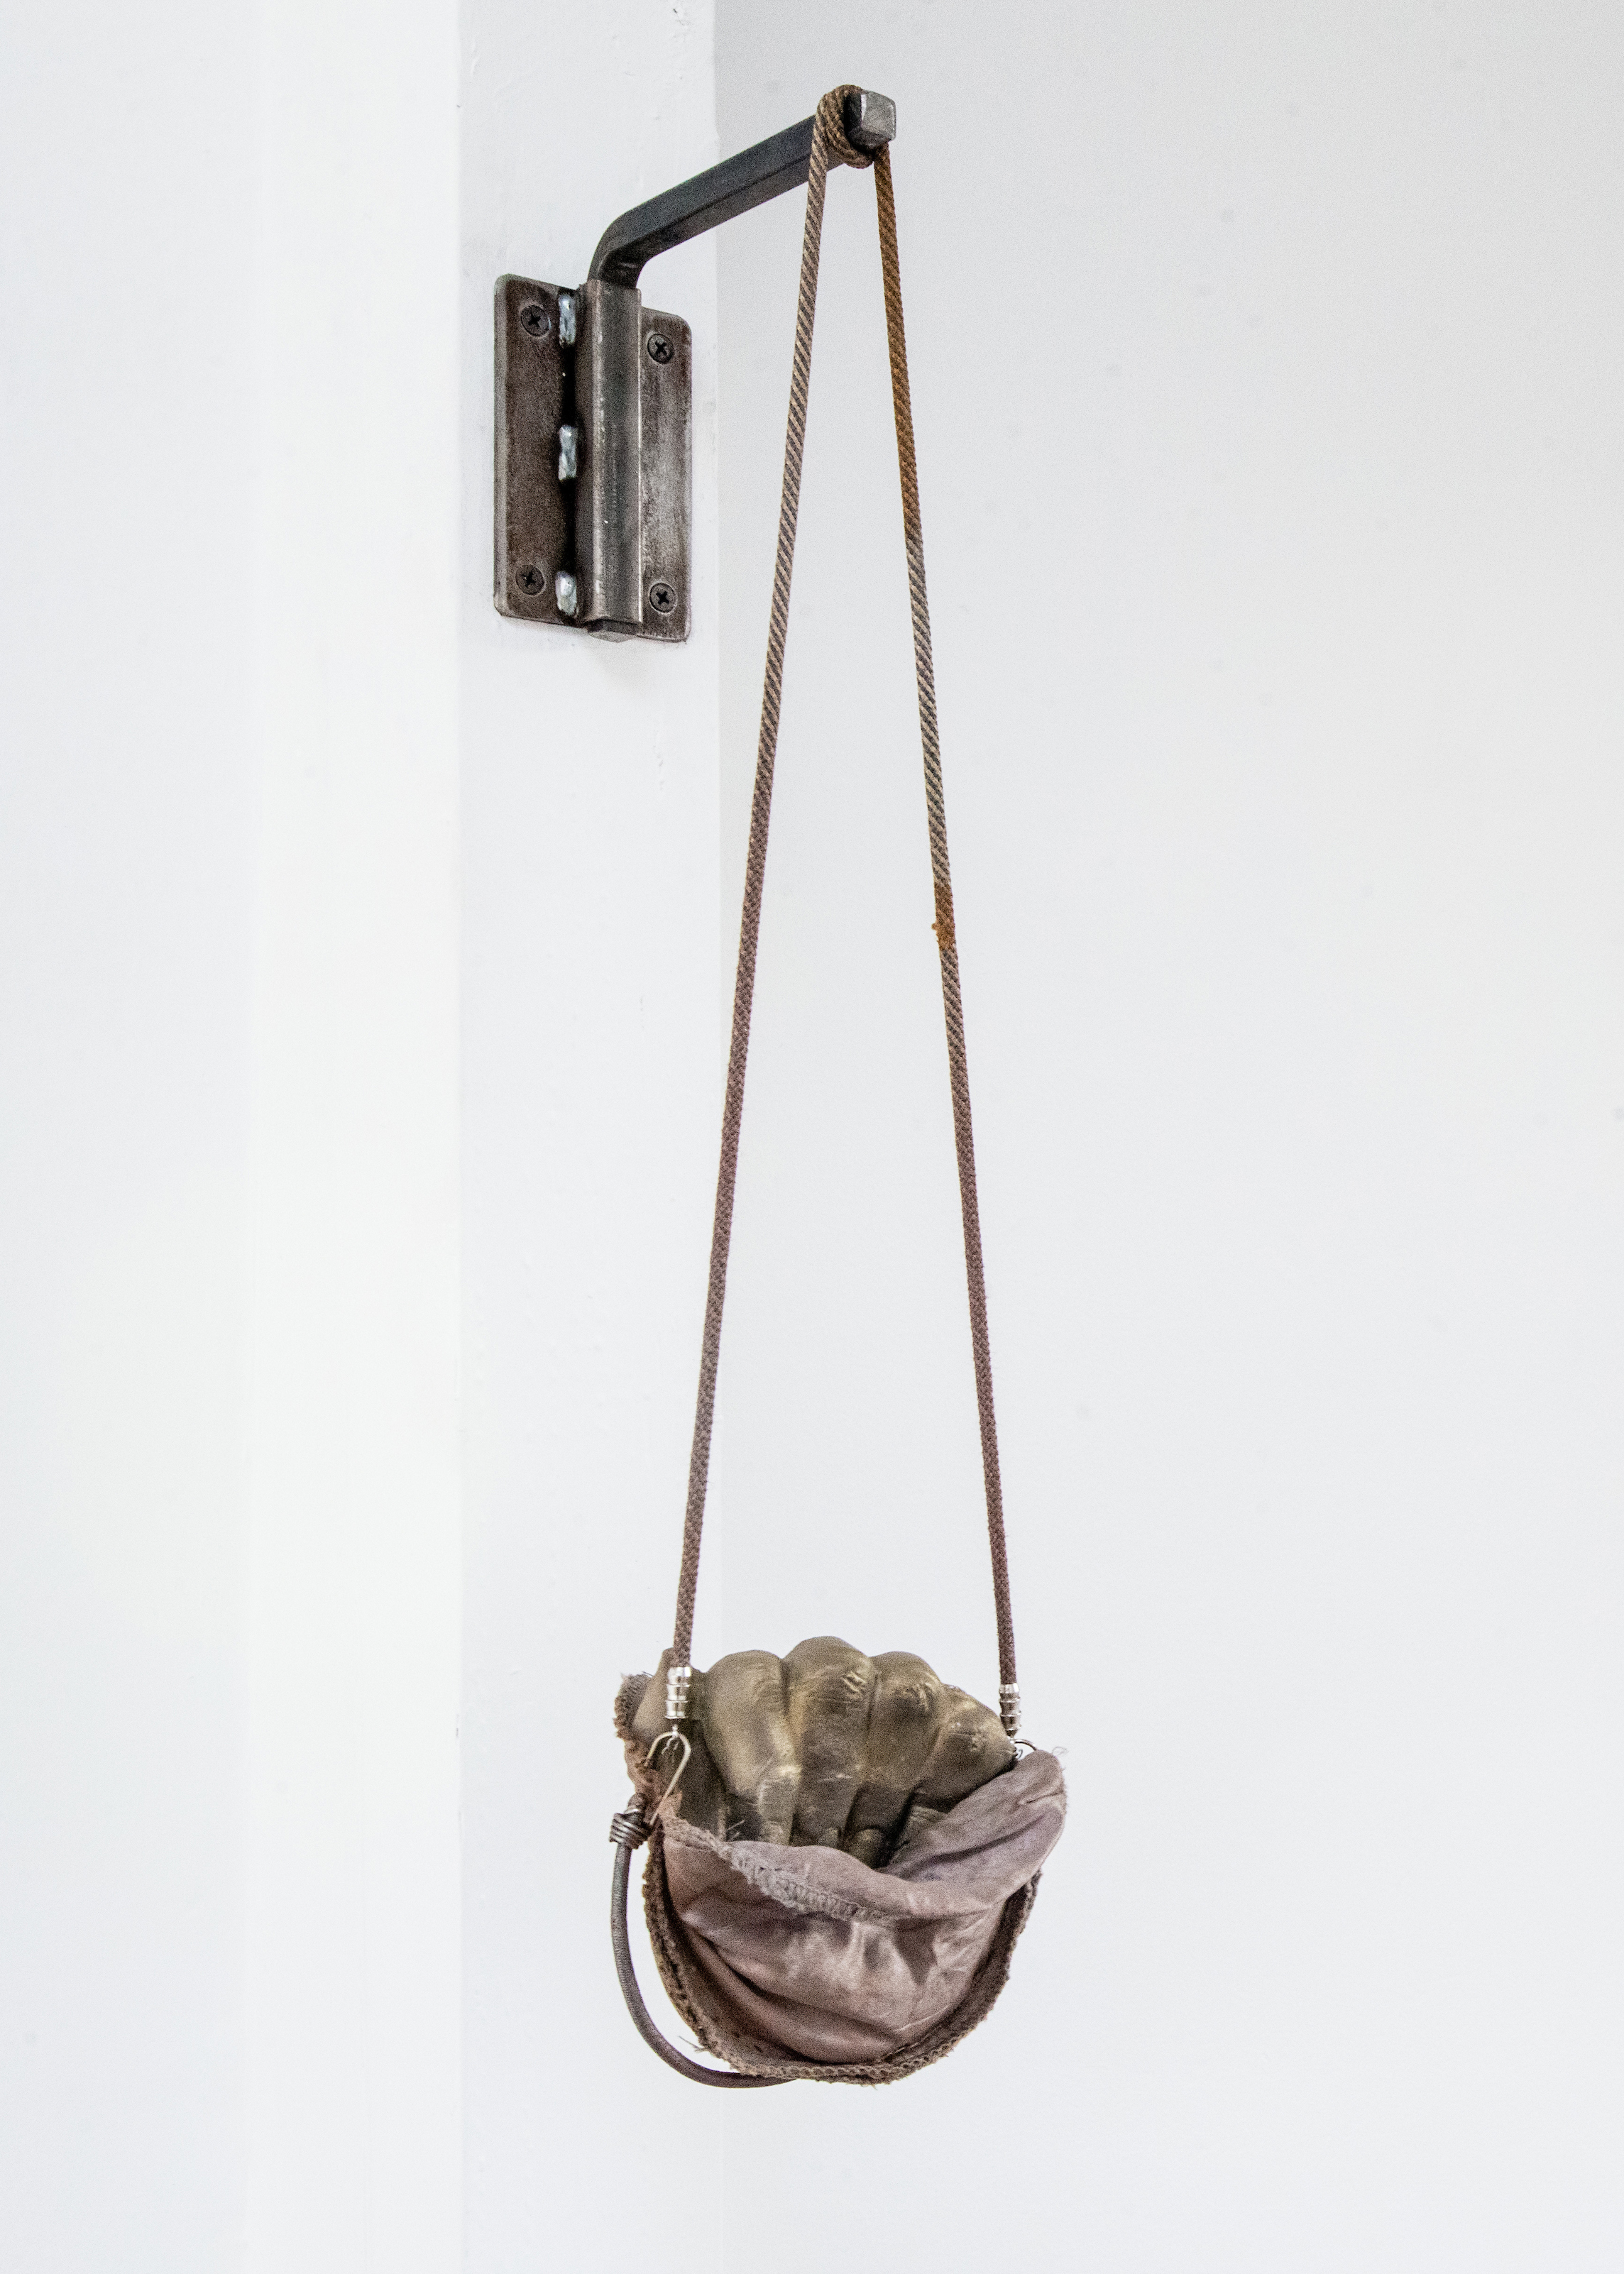  Jenine Marsh,  fist in pocket , 2018. Rust-stained shoulder-pads, necklace cord, bungee cord, staples, wire, powdered pigment, gypsum cement, steel hardware     